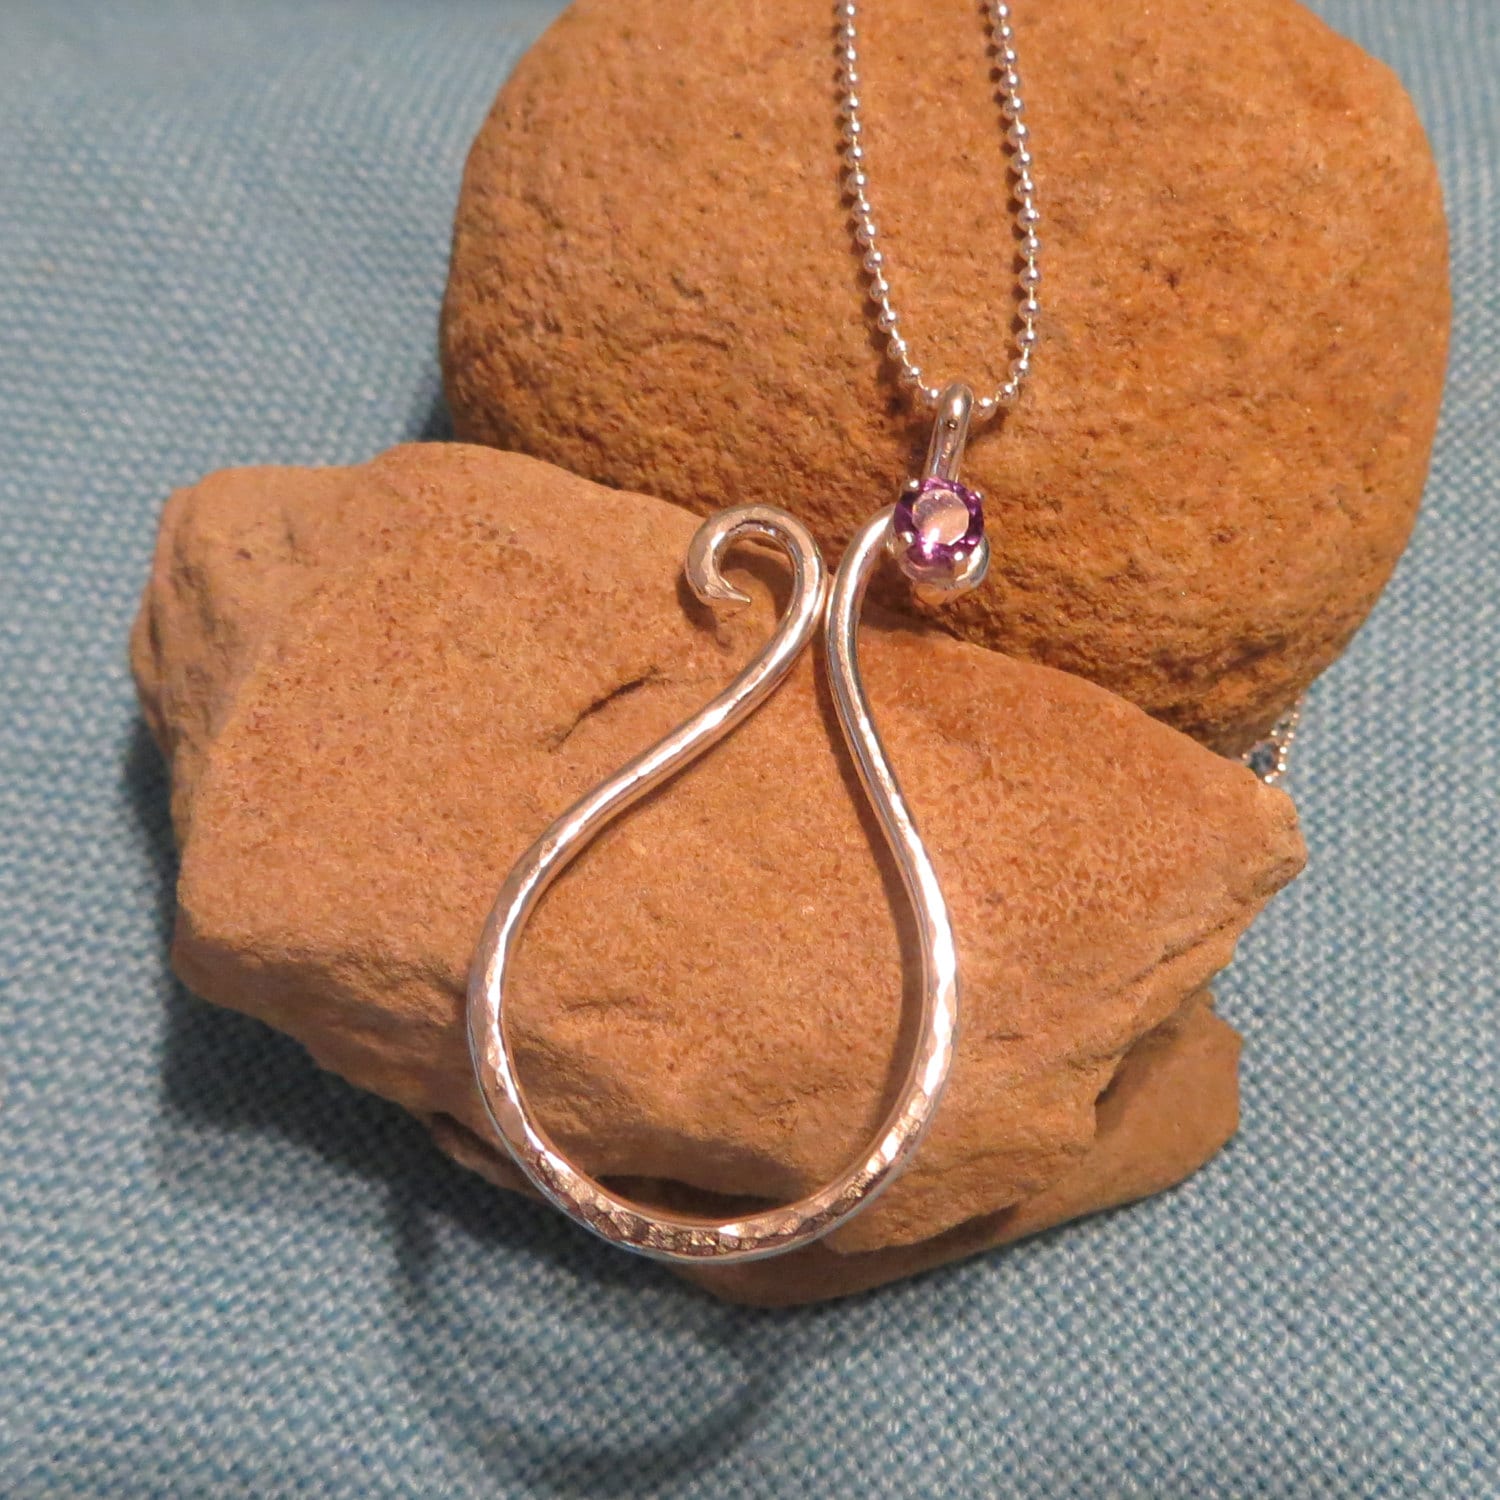 Amethyst Ring Holder Necklace Charm Pendant Sterling Silver